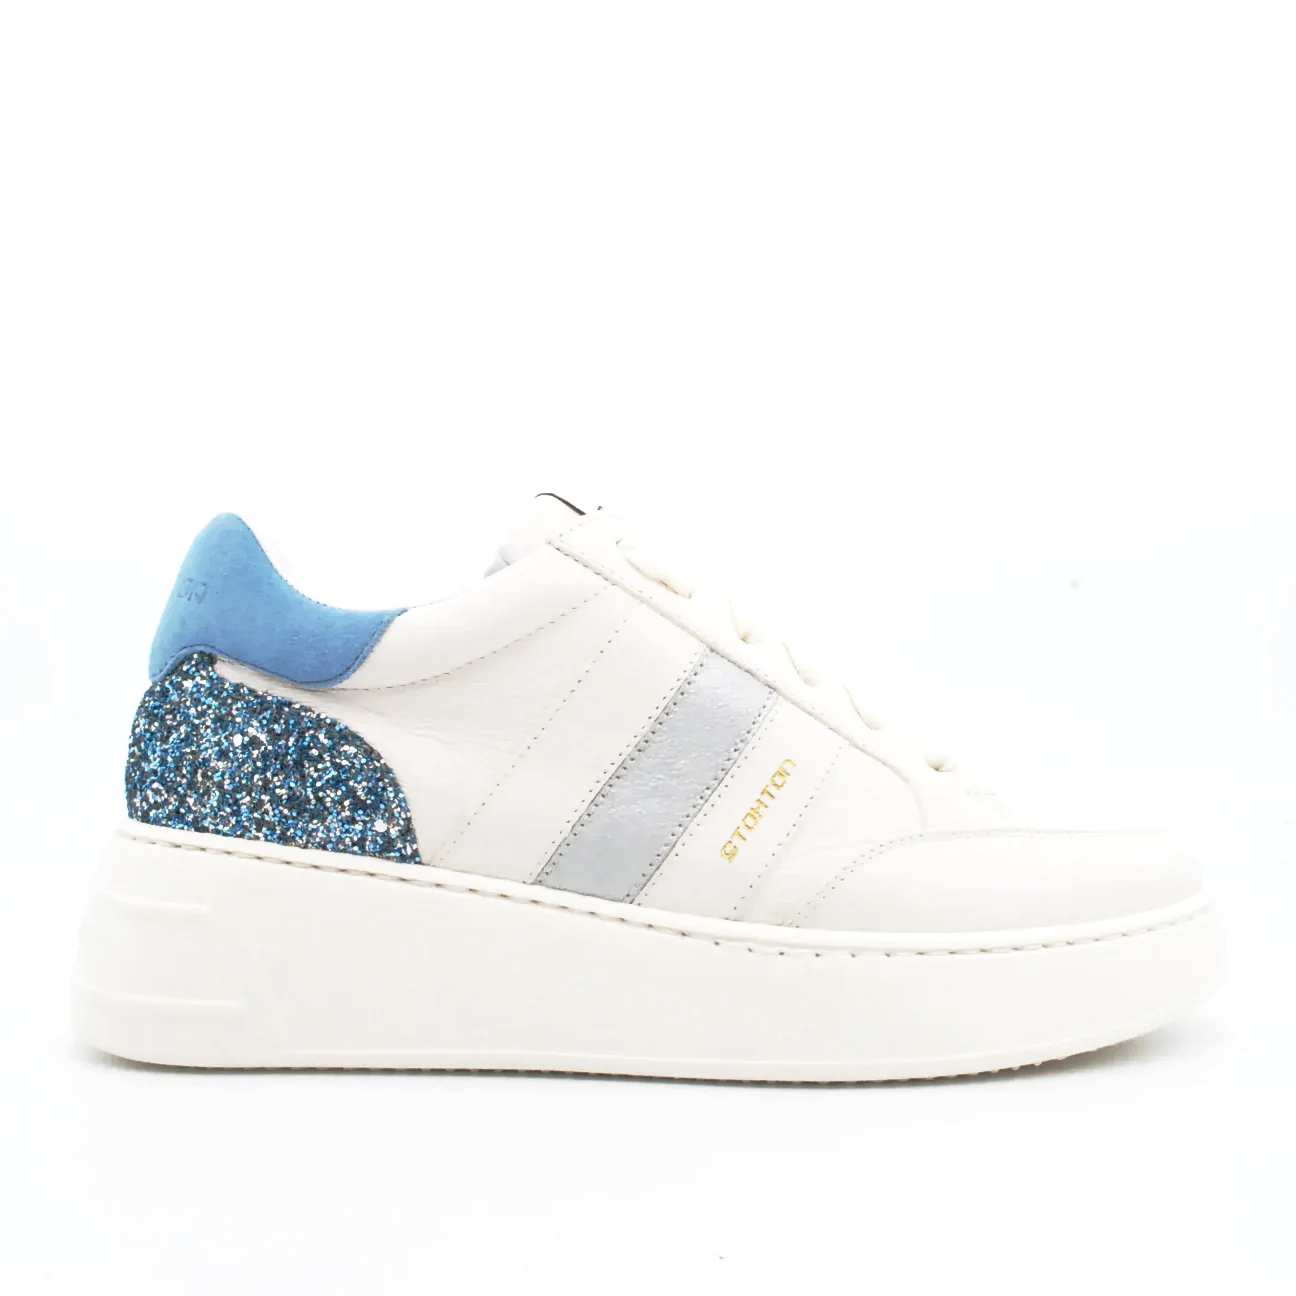 sneakers-stokton-in-pelle-35-bianco-pelle-sneakers_7bbf7fe8-7707-40e5-b502-98553ad83ad6.png